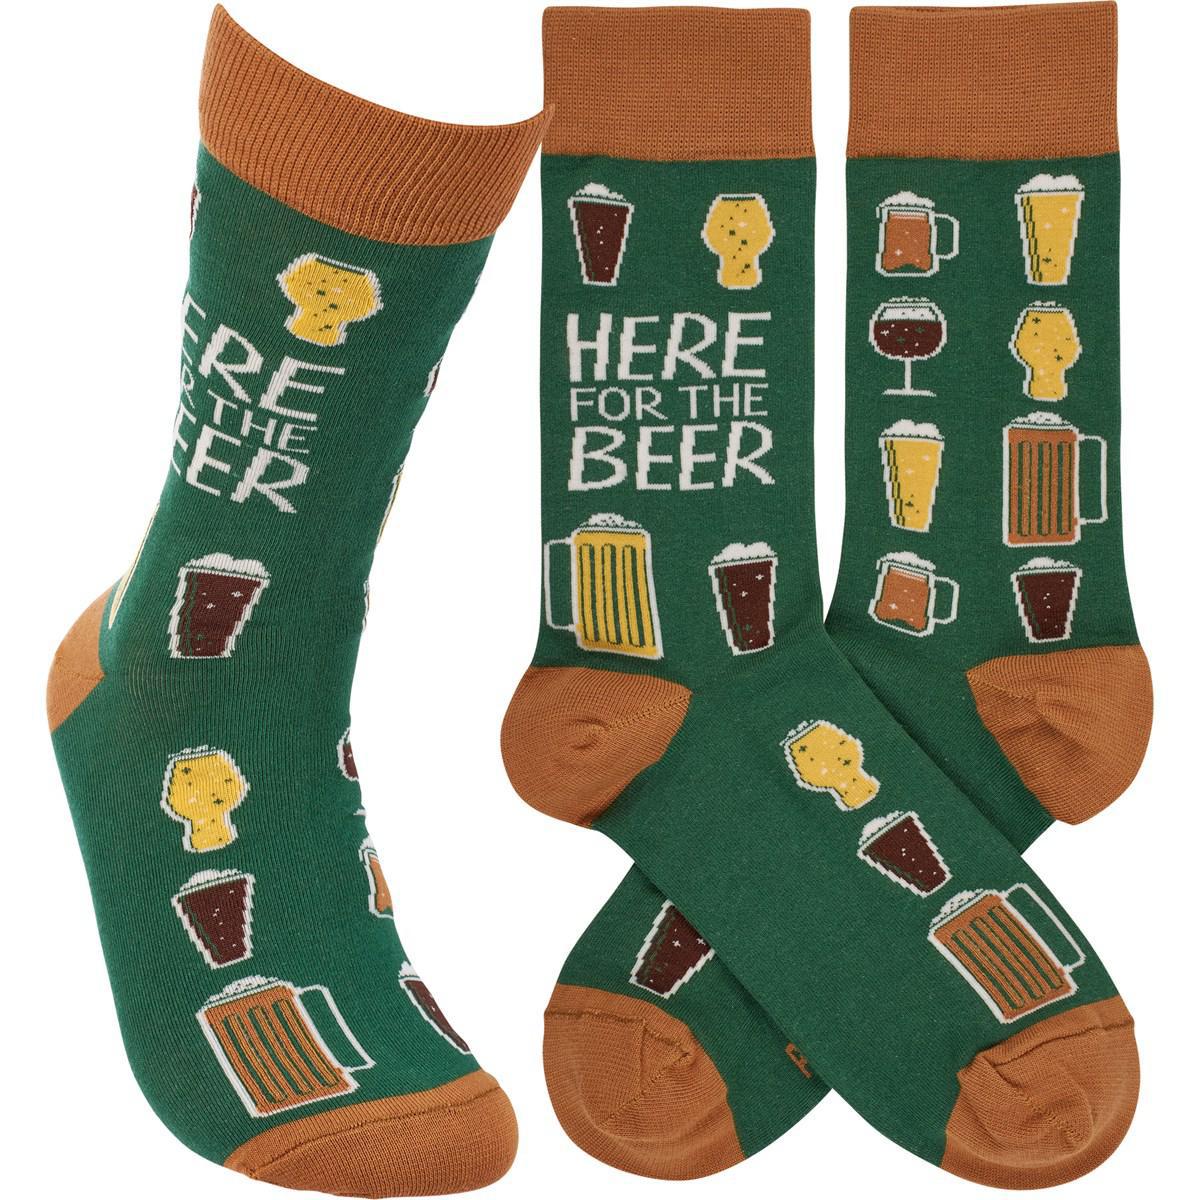 Here For The Beer Socks